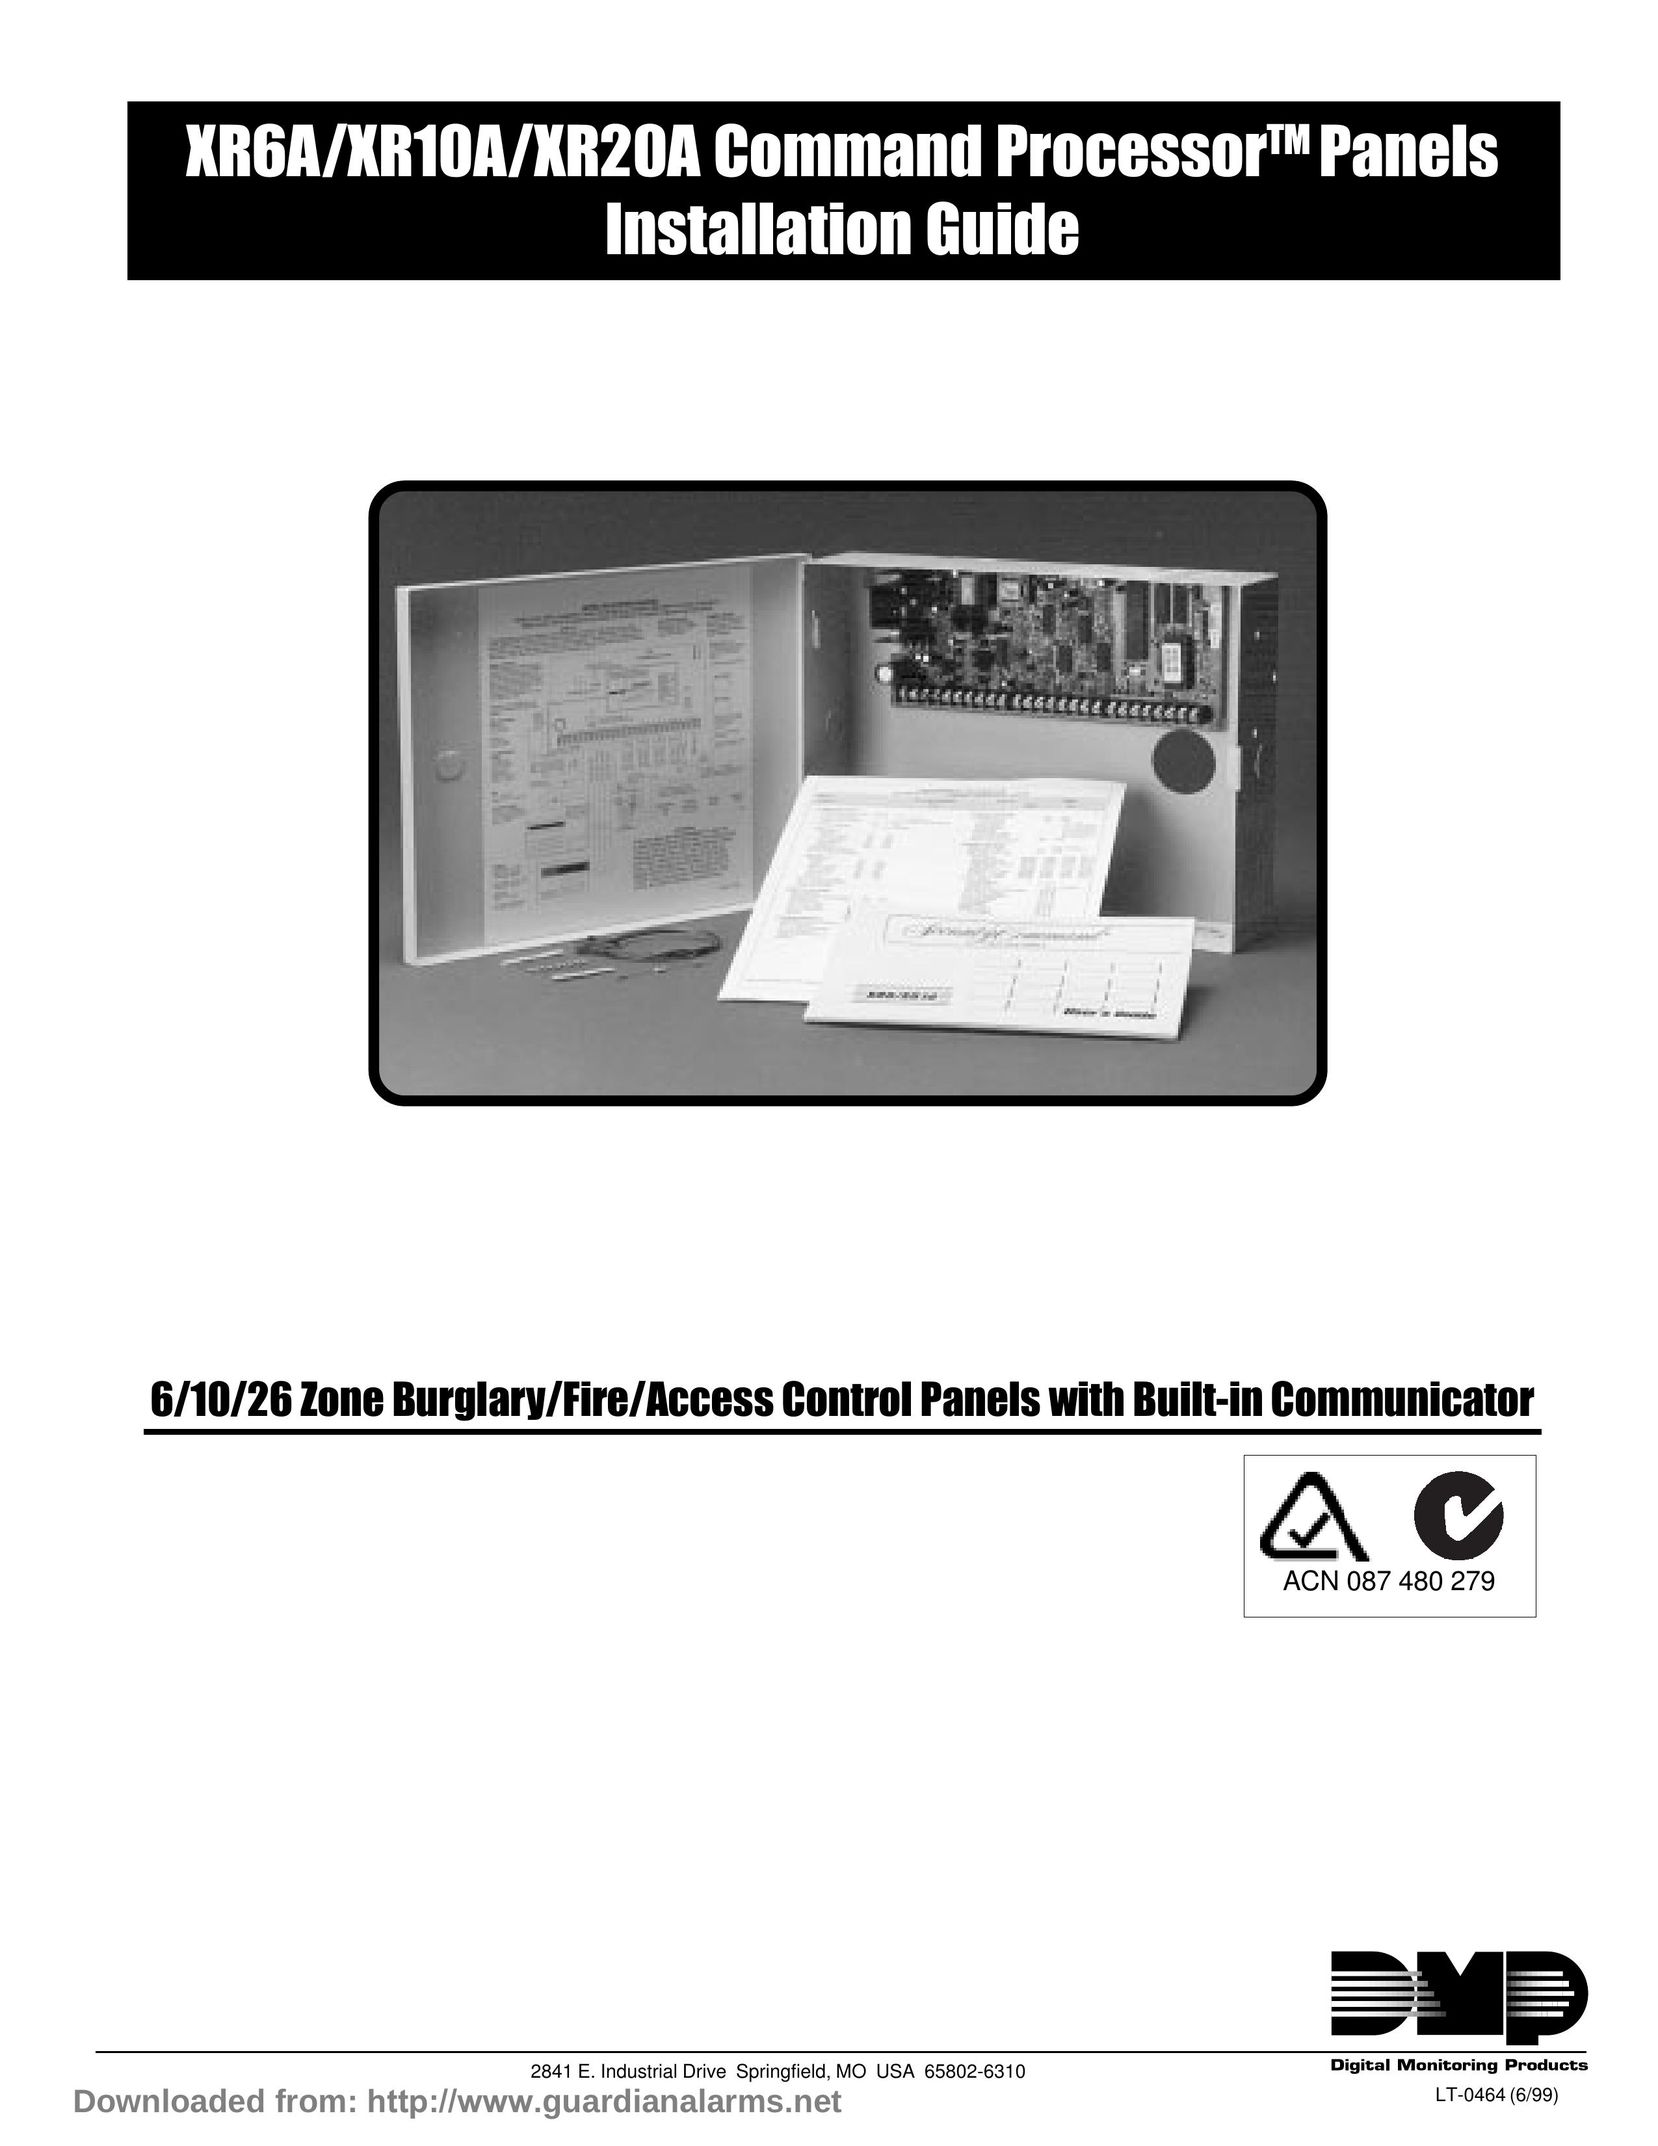 DMP Electronics XR6A Home Security System User Manual